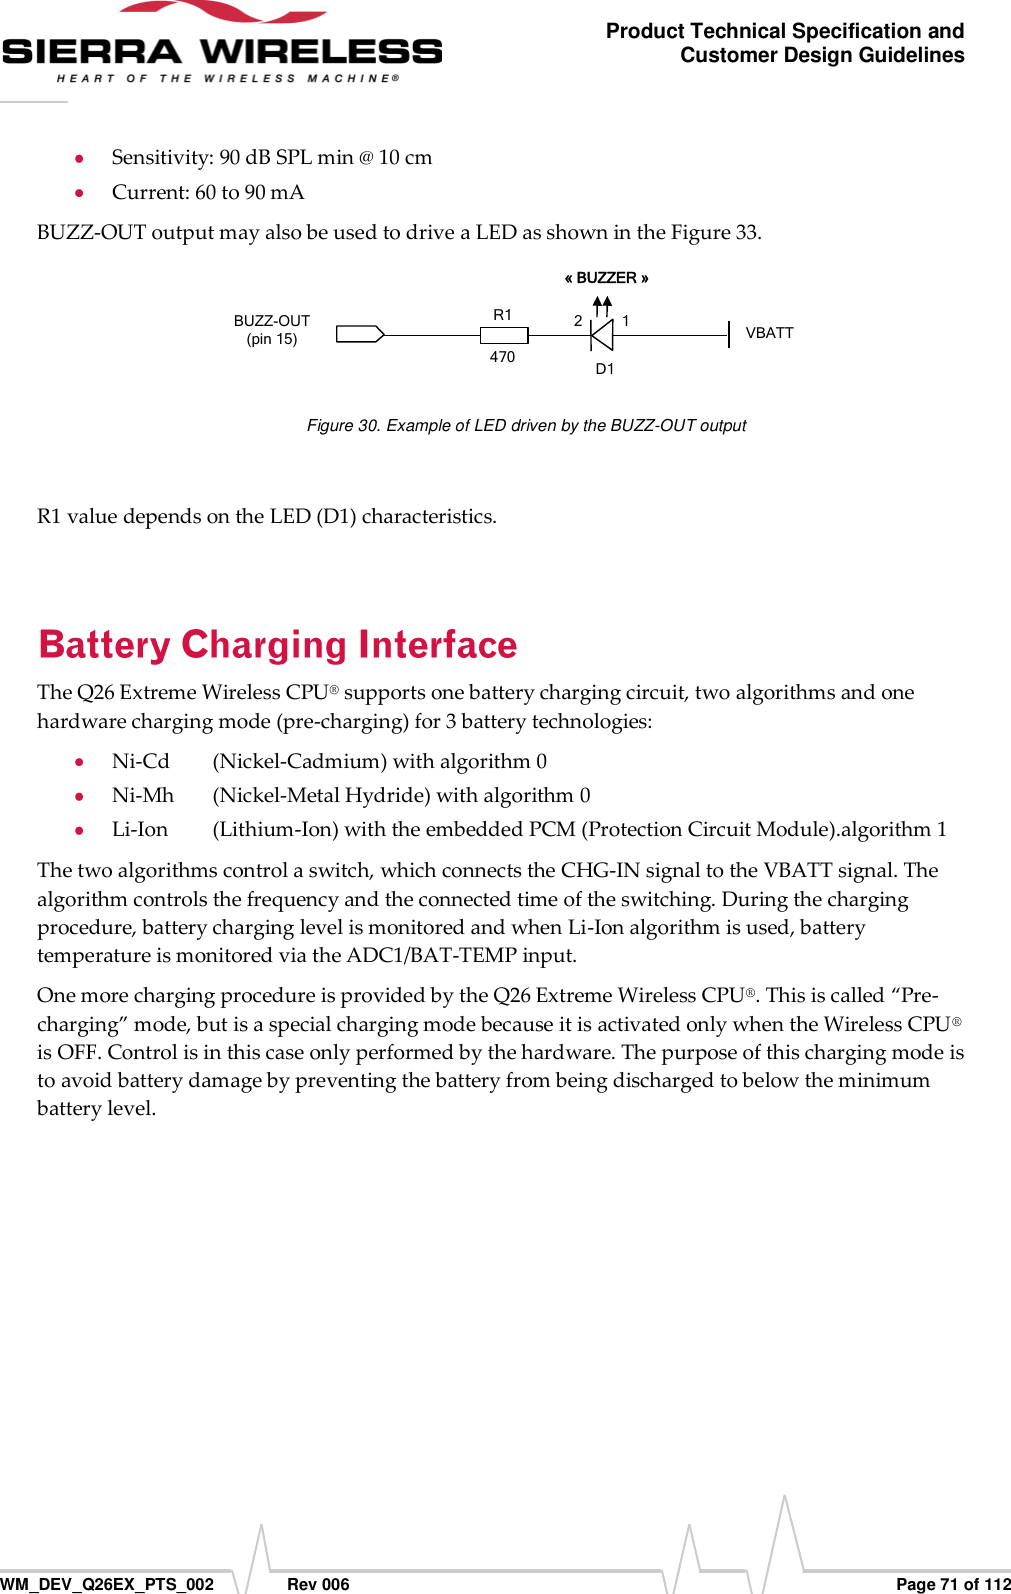      WM_DEV_Q26EX_PTS_002  Rev 006  Page 71 of 112 Product Technical Specification and Customer Design Guidelines  Sensitivity: 90 dB SPL min @ 10 cm  Current: 60 to 90 mA BUZZ-OUT output may also be used to drive a LED as shown in the Figure 33. BUZZ-OUT (pin 15) VBATT  « BUZZER »   D11 2 R1   470   Figure 30. Example of LED driven by the BUZZ-OUT output  R1 value depends on the LED (D1) characteristics.  The Q26 Extreme Wireless CPU® supports one battery charging circuit, two algorithms and one hardware charging mode (pre-charging) for 3 battery technologies:  Ni-Cd   (Nickel-Cadmium) with algorithm 0  Ni-Mh   (Nickel-Metal Hydride) with algorithm 0  Li-Ion   (Lithium-Ion) with the embedded PCM (Protection Circuit Module).algorithm 1 The two algorithms control a switch, which connects the CHG-IN signal to the VBATT signal. The algorithm controls the frequency and the connected time of the switching. During the charging procedure, battery charging level is monitored and when Li-Ion algorithm is used, battery temperature is monitored via the ADC1/BAT-TEMP input. One more charging procedure is provided by the Q26 Extreme Wireless CPU®. This is called “Pre-charging” mode, but is a special charging mode because it is activated only when the Wireless CPU® is OFF. Control is in this case only performed by the hardware. The purpose of this charging mode is to avoid battery damage by preventing the battery from being discharged to below the minimum battery level. 